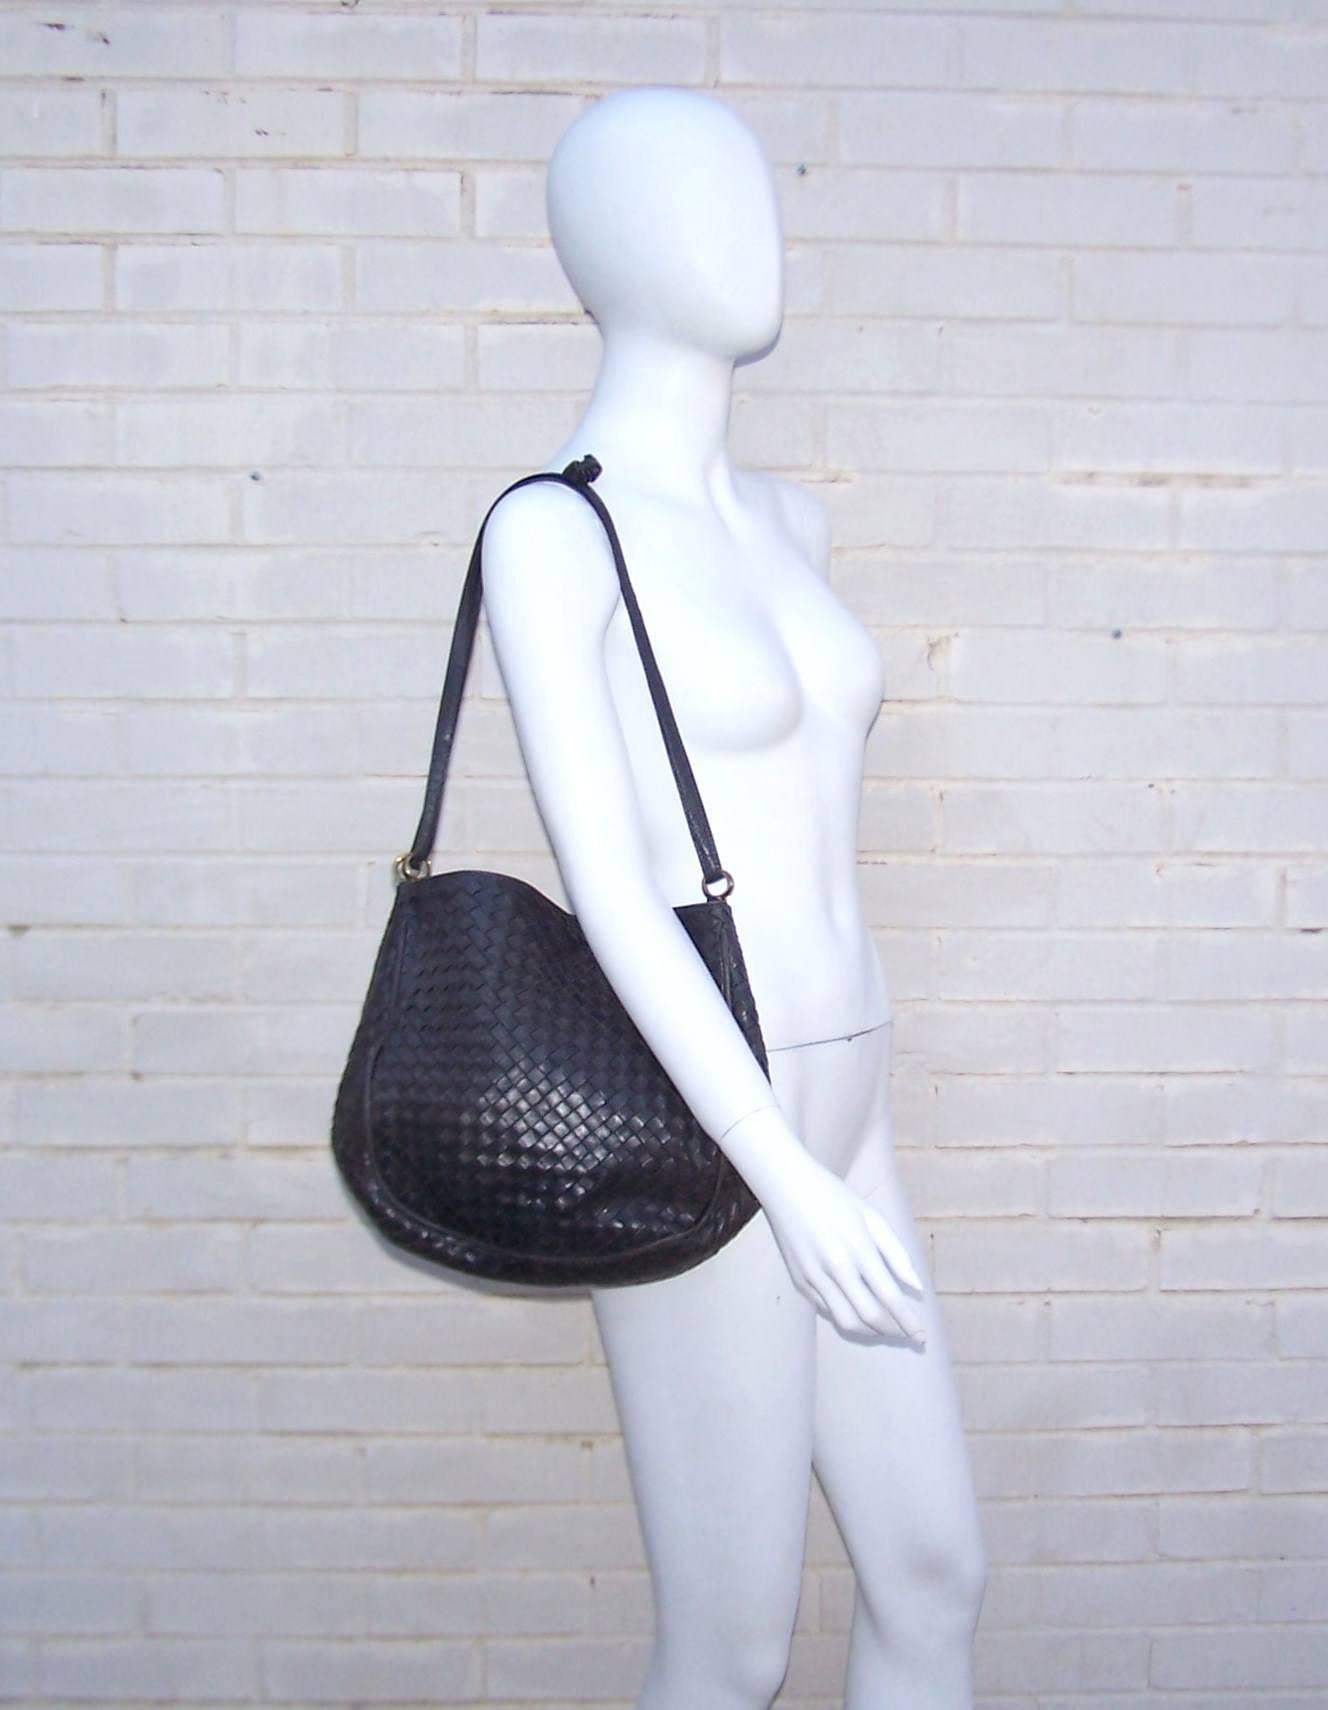 'When your own initials are enough'...such is the philosophy of the Italian fashion house, Bottega Veneta.  Bottega's unique 'intrecciato' woven leather design speaks volumes about style and quality without the necessity of a logo.  This charcoal